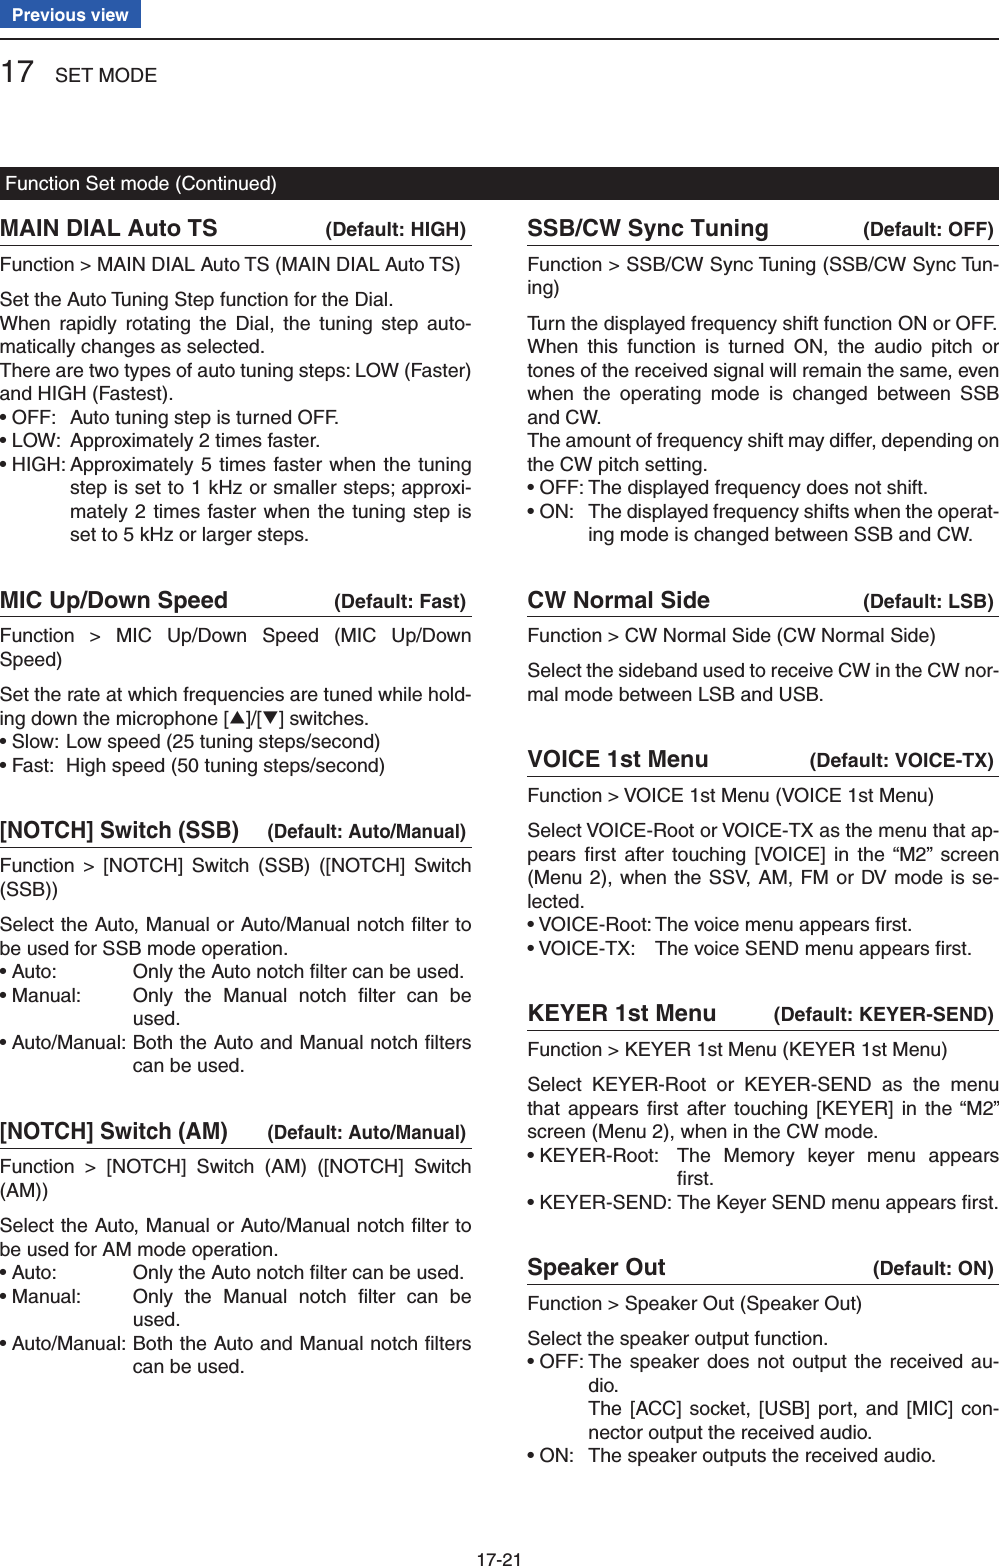 17 SET MODE17-21Previous viewMAIN DIAL Auto TS  (Default: HIGH)Function &gt; MAIN DIAL Auto TS (MAIN DIAL Auto TS)Set the Auto Tuning Step function for the Dial.When rapidly rotating the Dial, the tuning step auto-matically changes as selected.There are two types of auto tuning steps: LOW (Faster) and HIGH (Fastest).• OFF:  Auto tuning step is turned OFF.• LOW:  Approximately 2 times faster.• HIGH:  Approximately 5 times faster when the tuning step is set to 1 kHz or smaller steps; approxi-mately 2 times faster when the tuning step is set to 5 kHz or larger steps.MIC Up/Down Speed  (Default: Fast)Function &gt; MIC Up/Down Speed (MIC Up/Down Speed)Set the rate at which frequencies are tuned while hold-ing down the microphone [∫]/[√] switches.• Slow:  Low speed (25 tuning steps/second)• Fast:  High speed (50 tuning steps/second)[NOTCH] Switch (SSB)  (Default: Auto/Manual)Function &gt; [NOTCH] Switch (SSB) ([NOTCH] Switch (SSB))Select the Auto, Manual or Auto/Manual notch ﬁ lter to be used for SSB mode operation.• Auto:  Only the Auto notch ﬁ lter can be used.• Manual:   Only the Manual notch ﬁ lter can be used.• Auto/Manual:  Both the Auto and Manual notch ﬁ lters can be used.[NOTCH] Switch (AM)  (Default: Auto/Manual)Function &gt; [NOTCH] Switch (AM) ([NOTCH] Switch (AM))Select the Auto, Manual or Auto/Manual notch ﬁ lter to be used for AM mode operation.• Auto:  Only the Auto notch ﬁ lter can be used.• Manual:   Only the Manual notch ﬁ lter can be used.• Auto/Manual:  Both the Auto and Manual notch ﬁ lters can be used.SSB/CW Sync Tuning  (Default: OFF)Function &gt; SSB/CW Sync Tuning (SSB/CW Sync Tun-ing)Turn the displayed frequency shift function ON or OFF.When this function is turned ON, the audio pitch or tones of the received signal will remain the same, even when the operating mode is changed between SSB and CW.The amount of frequency shift may differ, depending on the CW pitch setting.• OFF: The displayed frequency does not shift.• ON:   The displayed frequency shifts when the operat-ing mode is changed between SSB and CW.CW Normal Side  (Default: LSB)Function &gt; CW Normal Side (CW Normal Side)Select the sideband used to receive CW in the CW nor-mal mode between LSB and USB.VOICE 1st Menu  (Default: VOICE-TX)Function &gt; VOICE 1st Menu (VOICE 1st Menu)Select VOICE-Root or VOICE-TX as the menu that ap-pears ﬁ rst after touching [VOICE] in the “M2” screen (Menu 2), when the SSV, AM, FM or DV mode is se-lected.• VOICE-Root: The voice menu appears ﬁ rst.• VOICE-TX:  The voice SEND menu appears ﬁ rst.KEYER 1st Menu  (Default: KEYER-SEND)Function &gt; KEYER 1st Menu (KEYER 1st Menu)Select KEYER-Root or KEYER-SEND as the menu that appears ﬁ rst after touching [KEYER] in the “M2” screen (Menu 2), when in the CW mode.• KEYER-Root:   The Memory keyer menu appears ﬁ rst.• KEYER-SEND: The Keyer SEND menu appears ﬁ rst.Speaker Out  (Default: ON)Function &gt; Speaker Out (Speaker Out)Select the speaker output function.• OFF:  The speaker does not output the received au-dio.    The [ACC] socket, [USB] port, and [MIC] con-nector output the received audio.• ON:  The speaker outputs the received audio.Function Set mode (Continued)